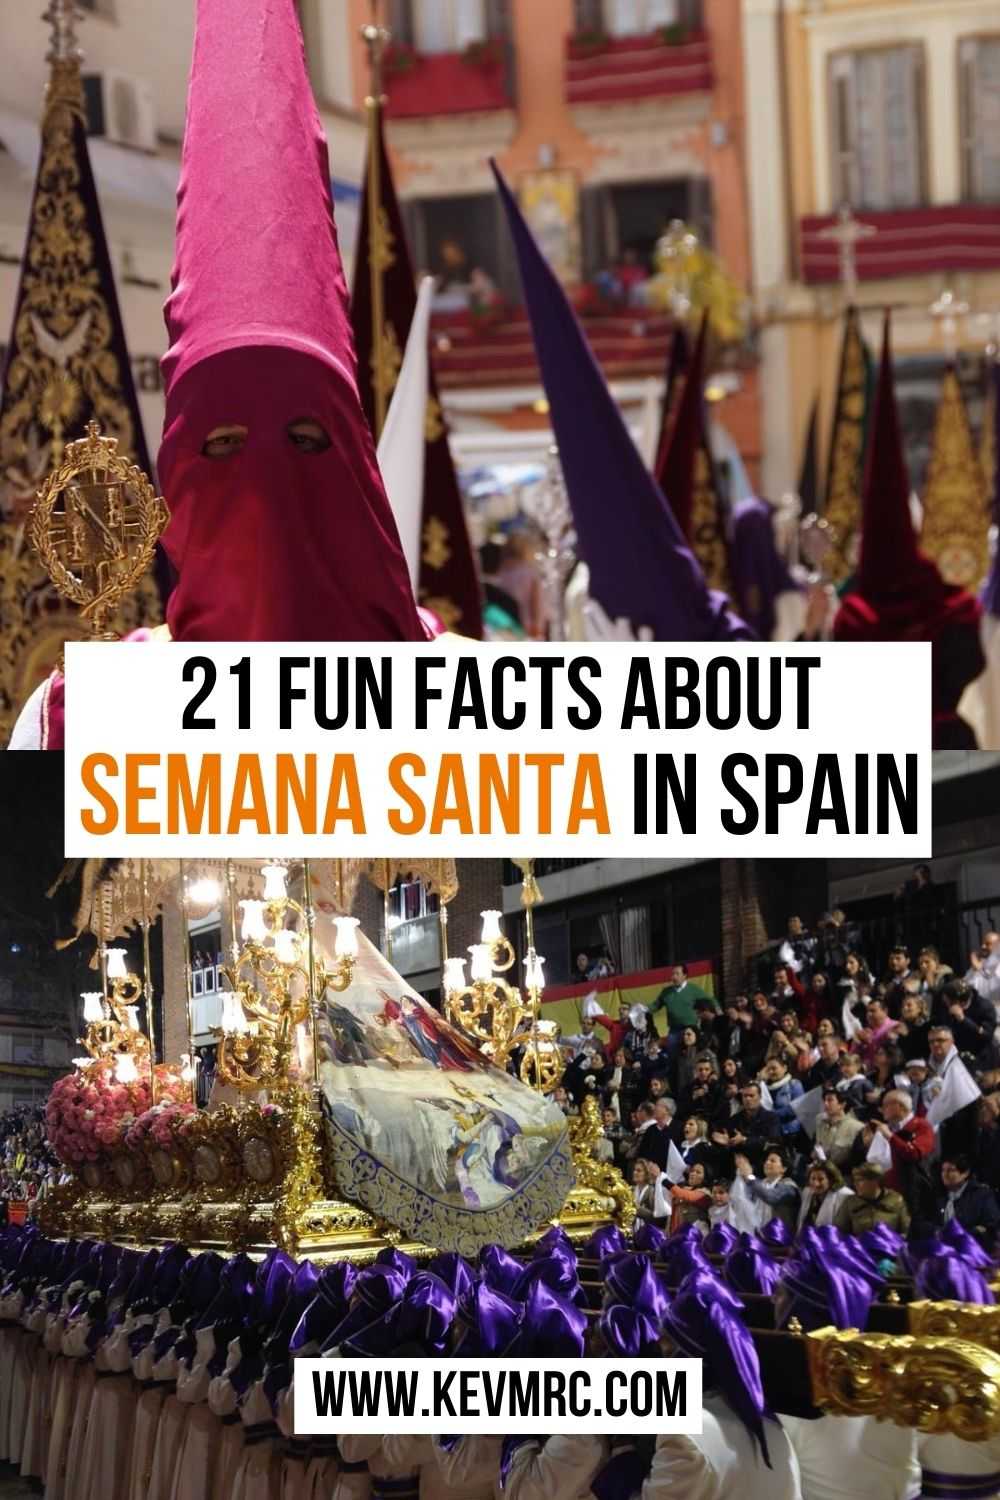 In Spain, Holy Week (Semana Santa in Spanish) is one of the most important holidays in the country. Learn more with these 21 interesting facts about Semana Santa in Spain! semana santa facts | holy week facts | easter facts | spain facts fun | fun facts about spain #spainfacts #easter